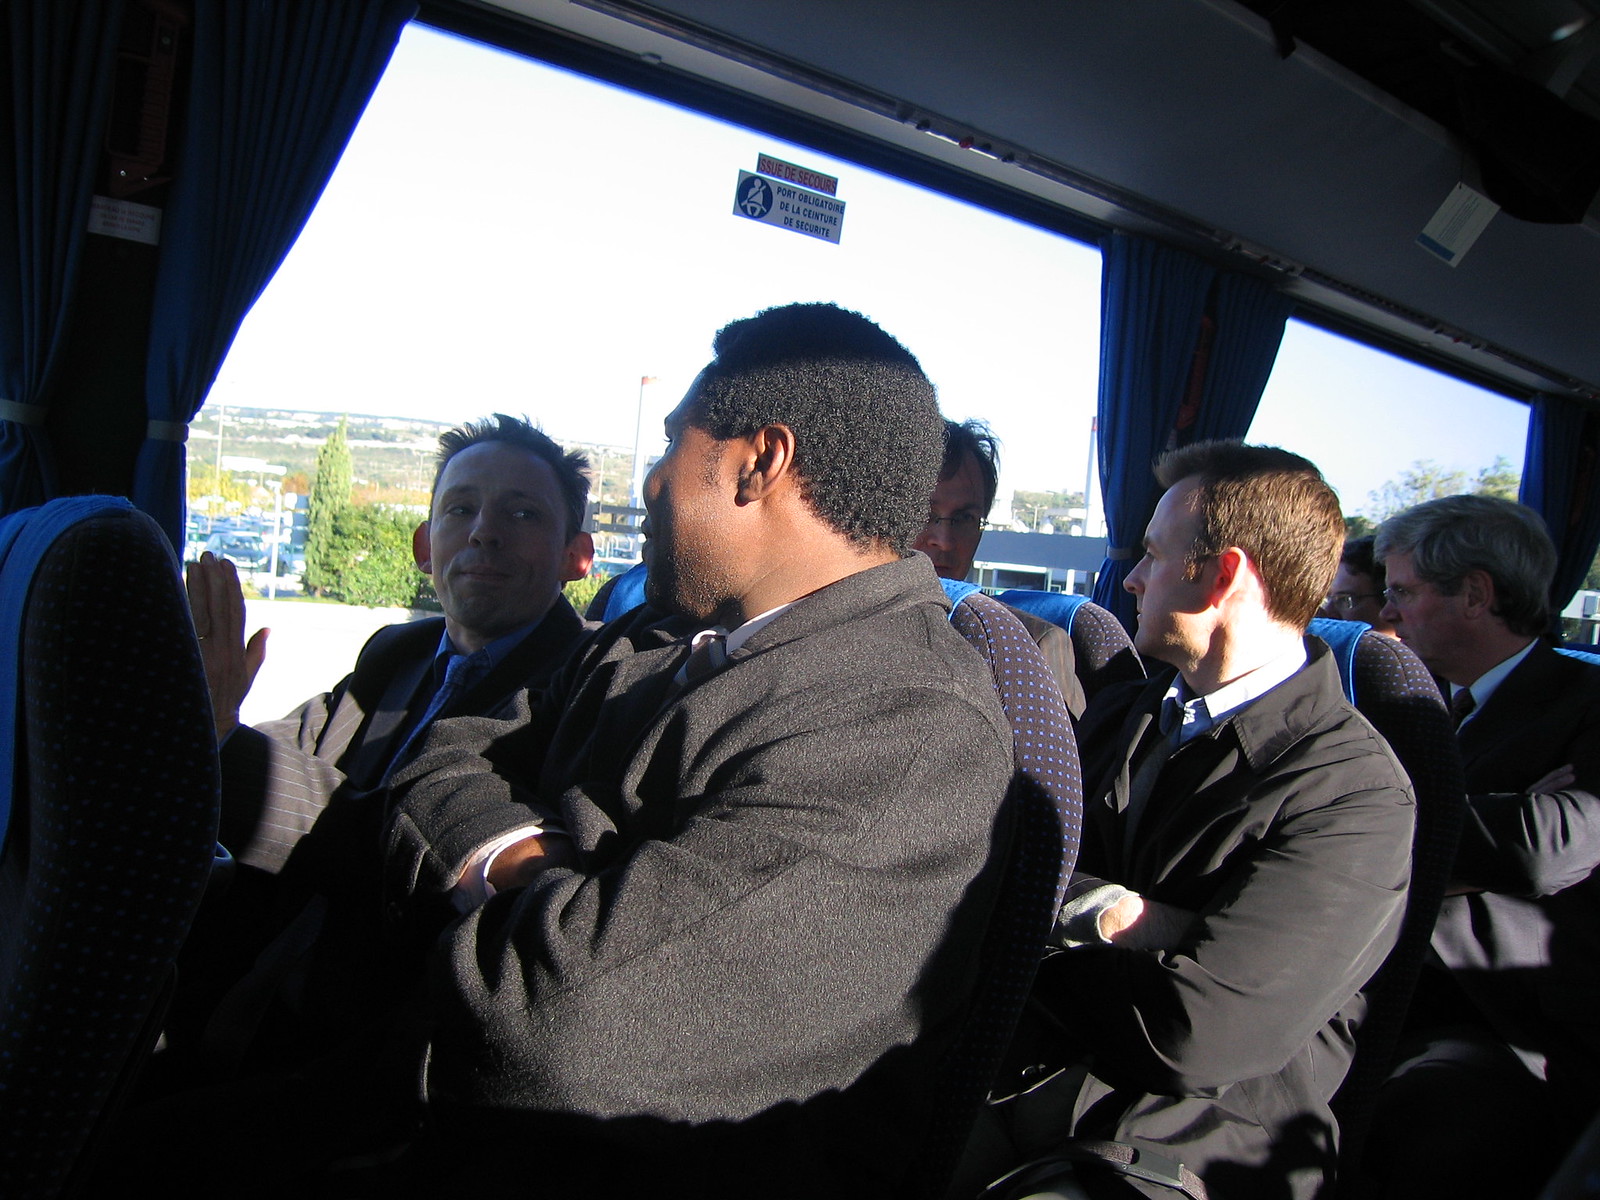 3 Networking on bus